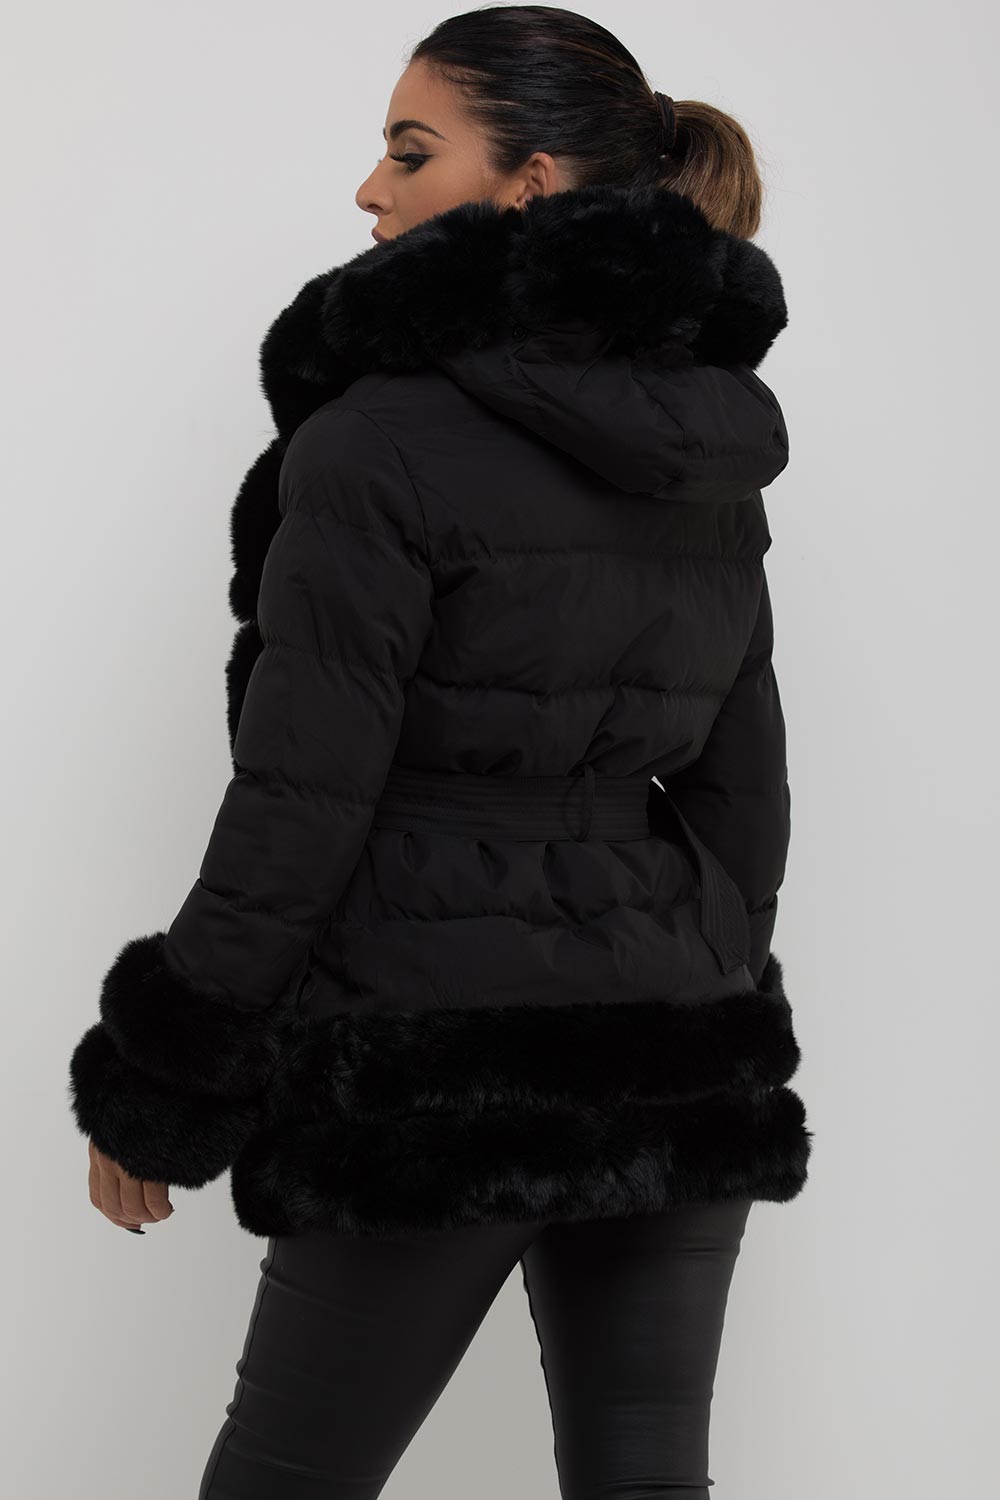 puffer jacket with fur trim cuff and hood womens